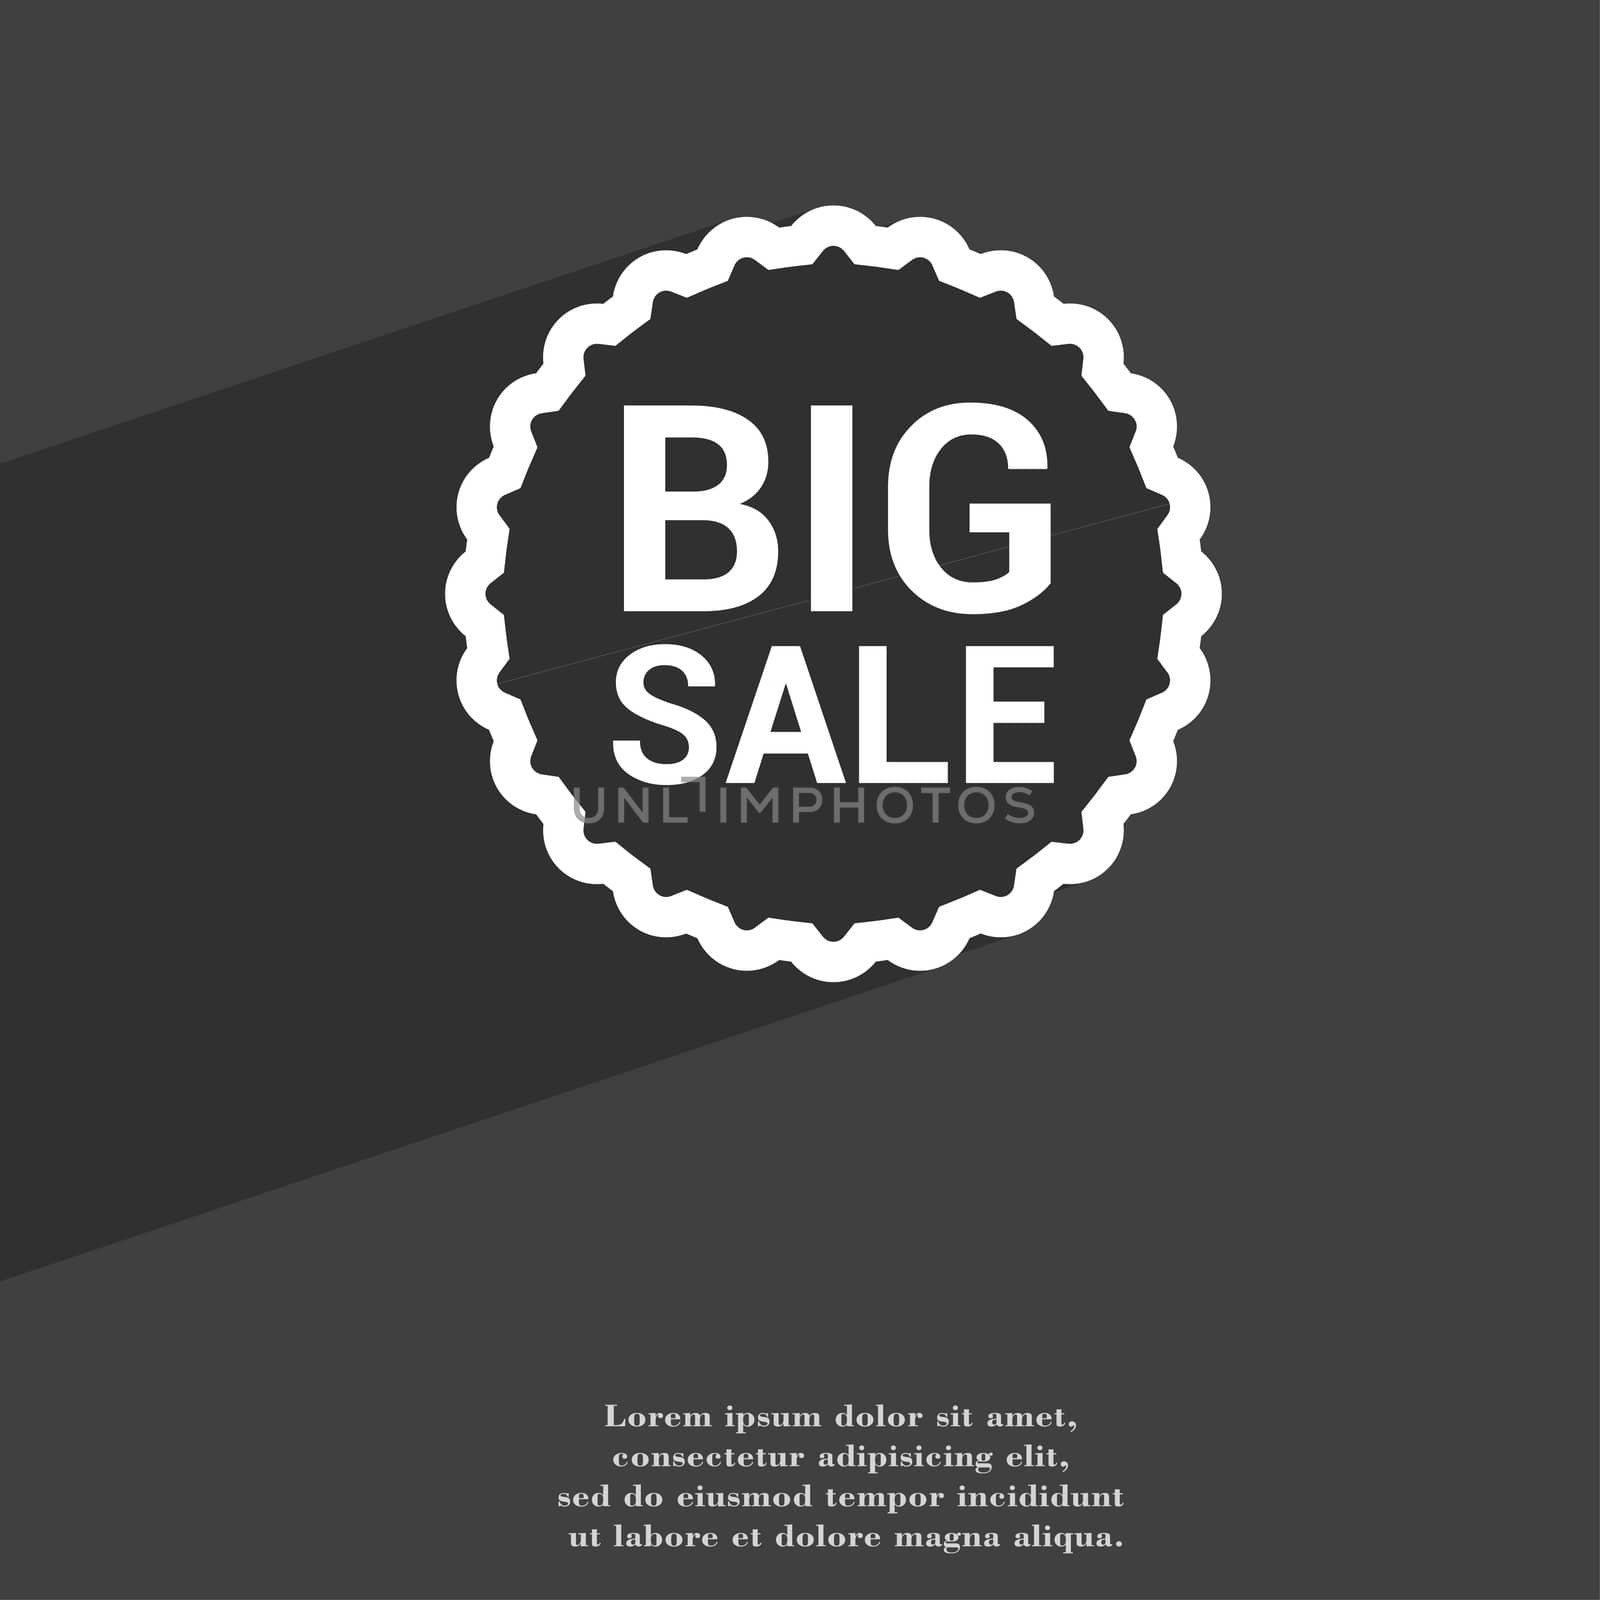 Big sale icon symbol Flat modern web design with long shadow and space for your text. illustration